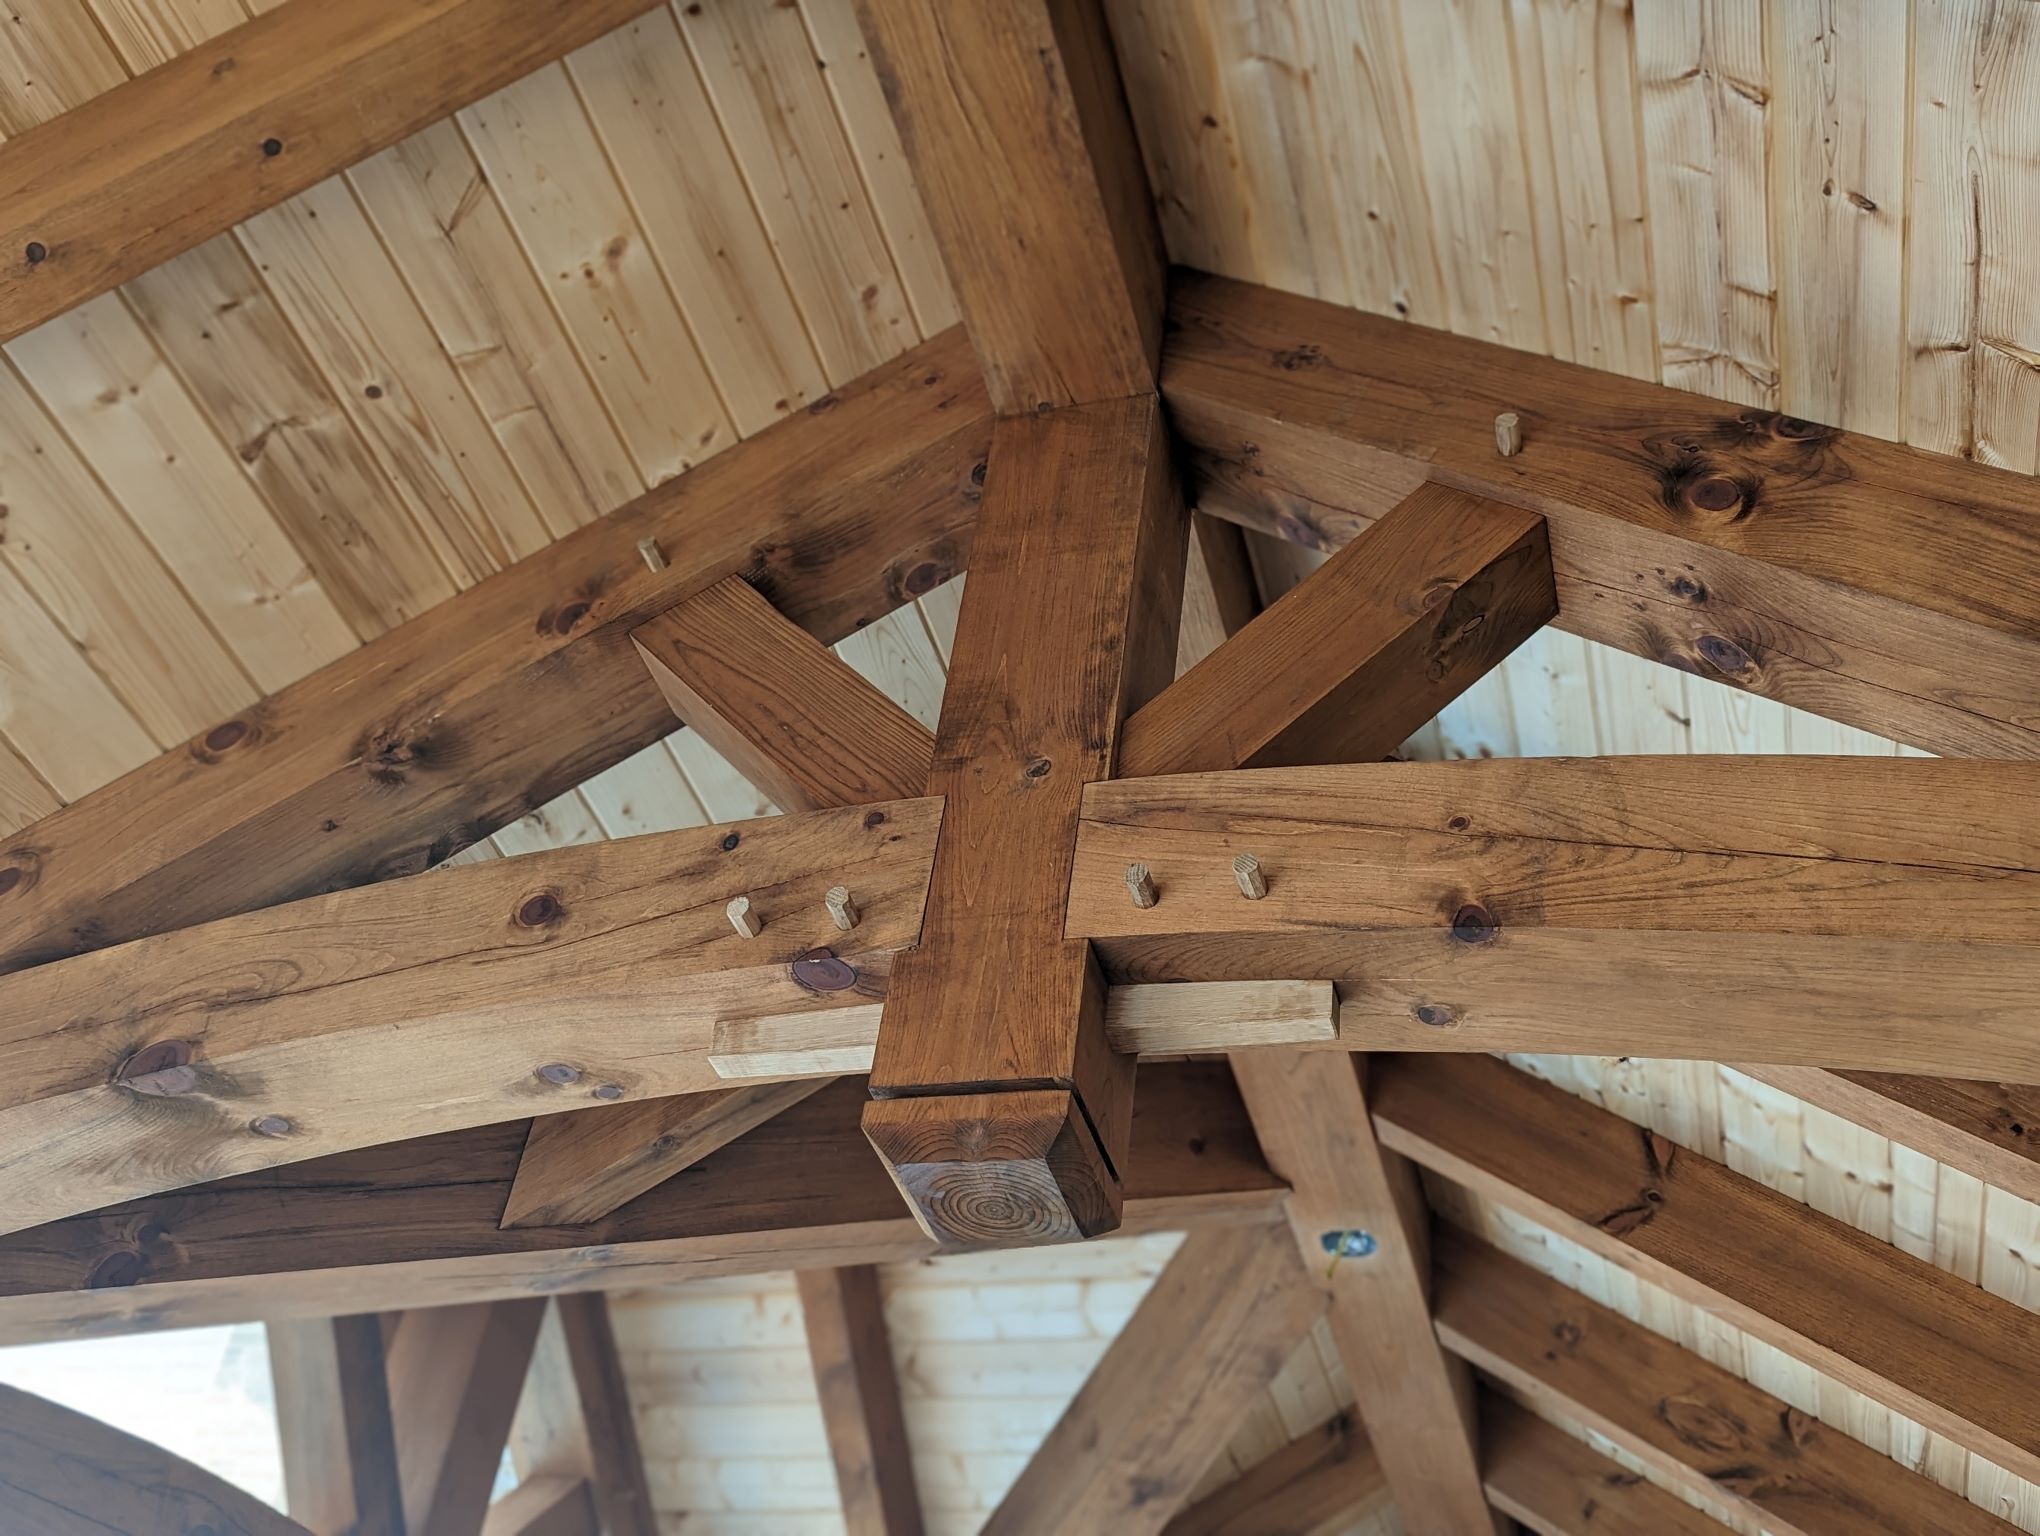 Using Ungraded Lumber for Construction